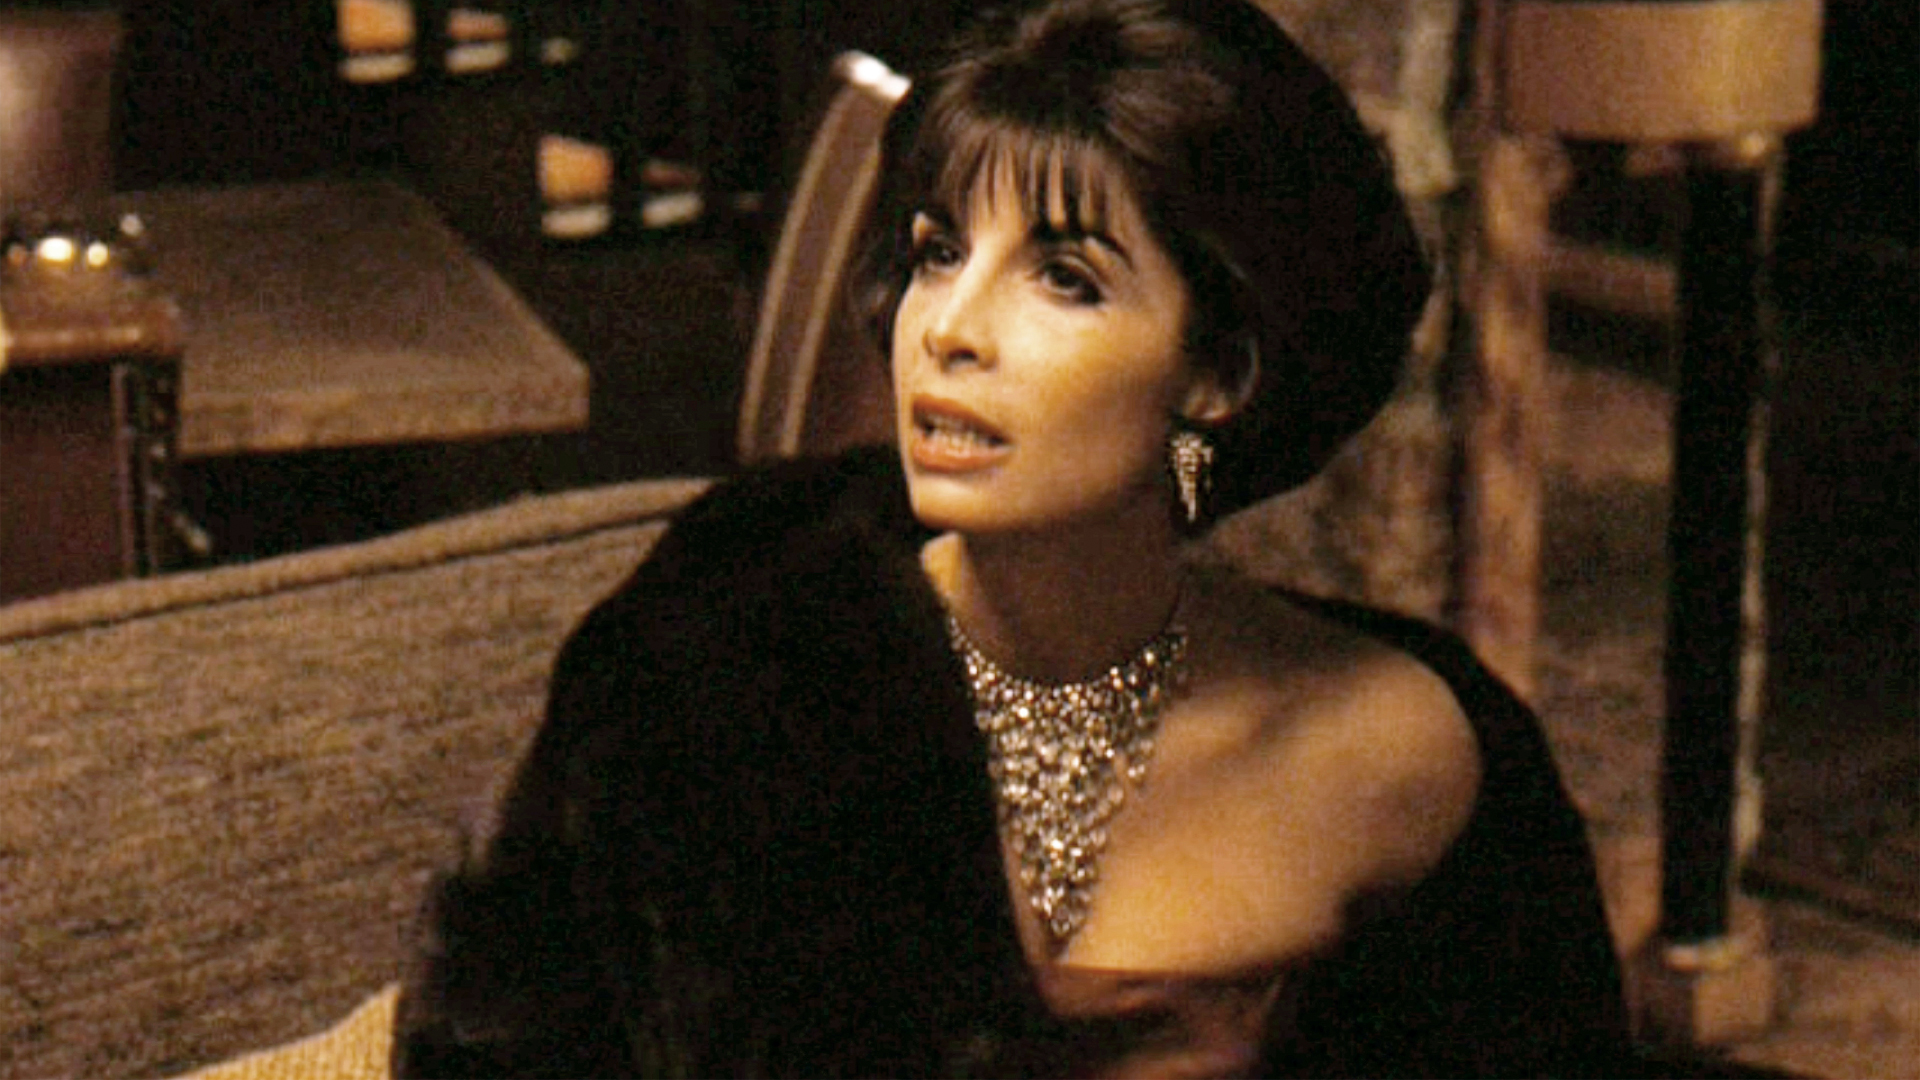 Talia Shire embodies the Mob Wife aesthetic in The Godfather